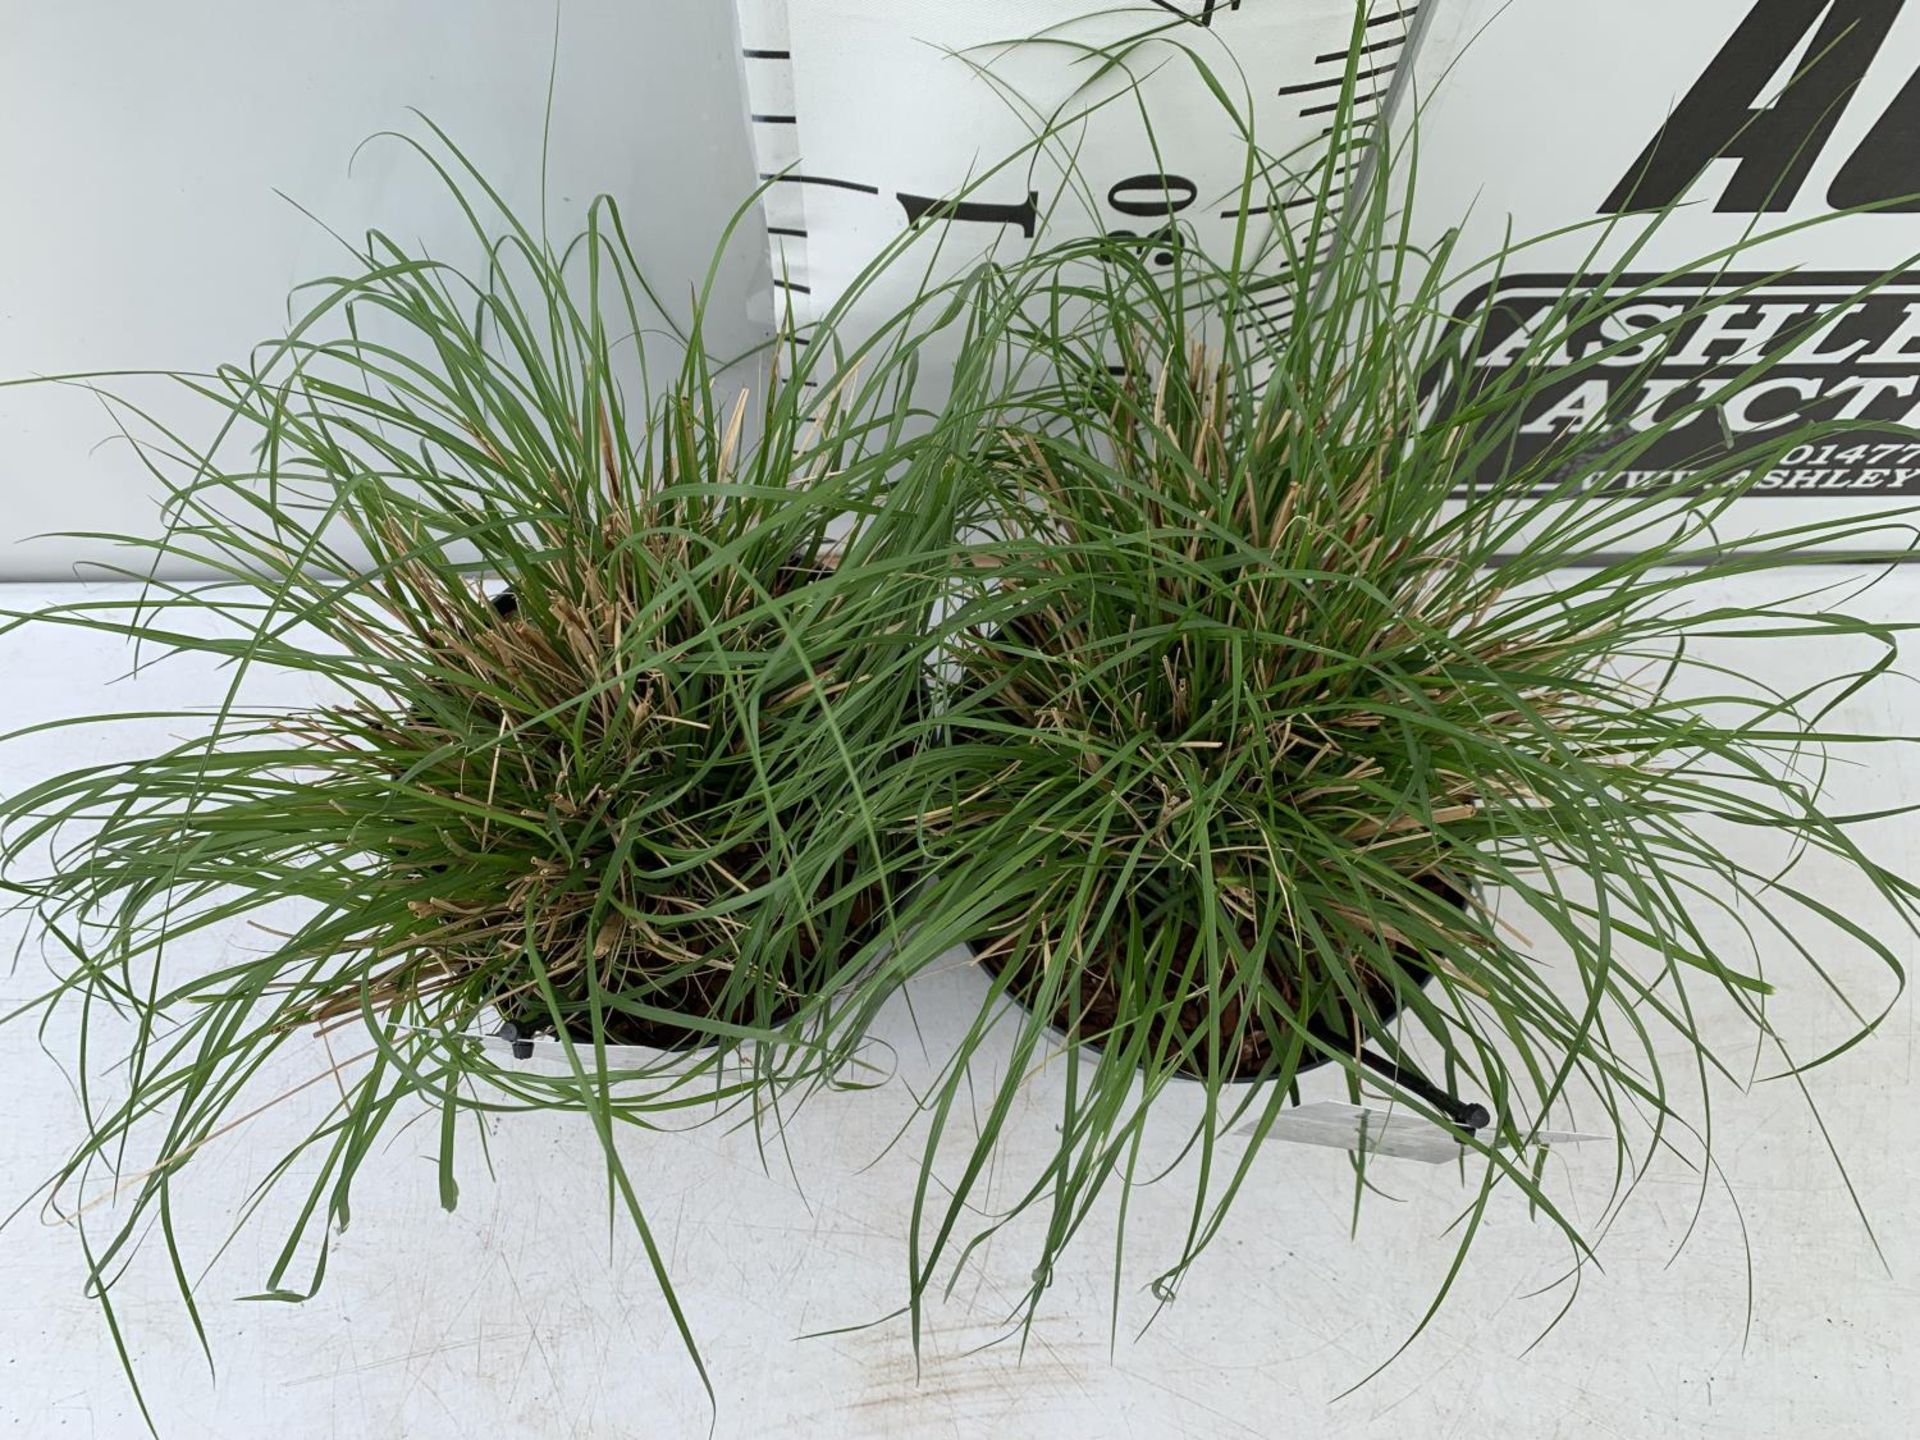 TWO ORNAMENTAL GRASSES PENNISETUM 'HAMELN' APPROX 45CM IN HEIGHT IN 4 LTR POTS PLUS VAT TO BE SOLD - Image 3 of 8